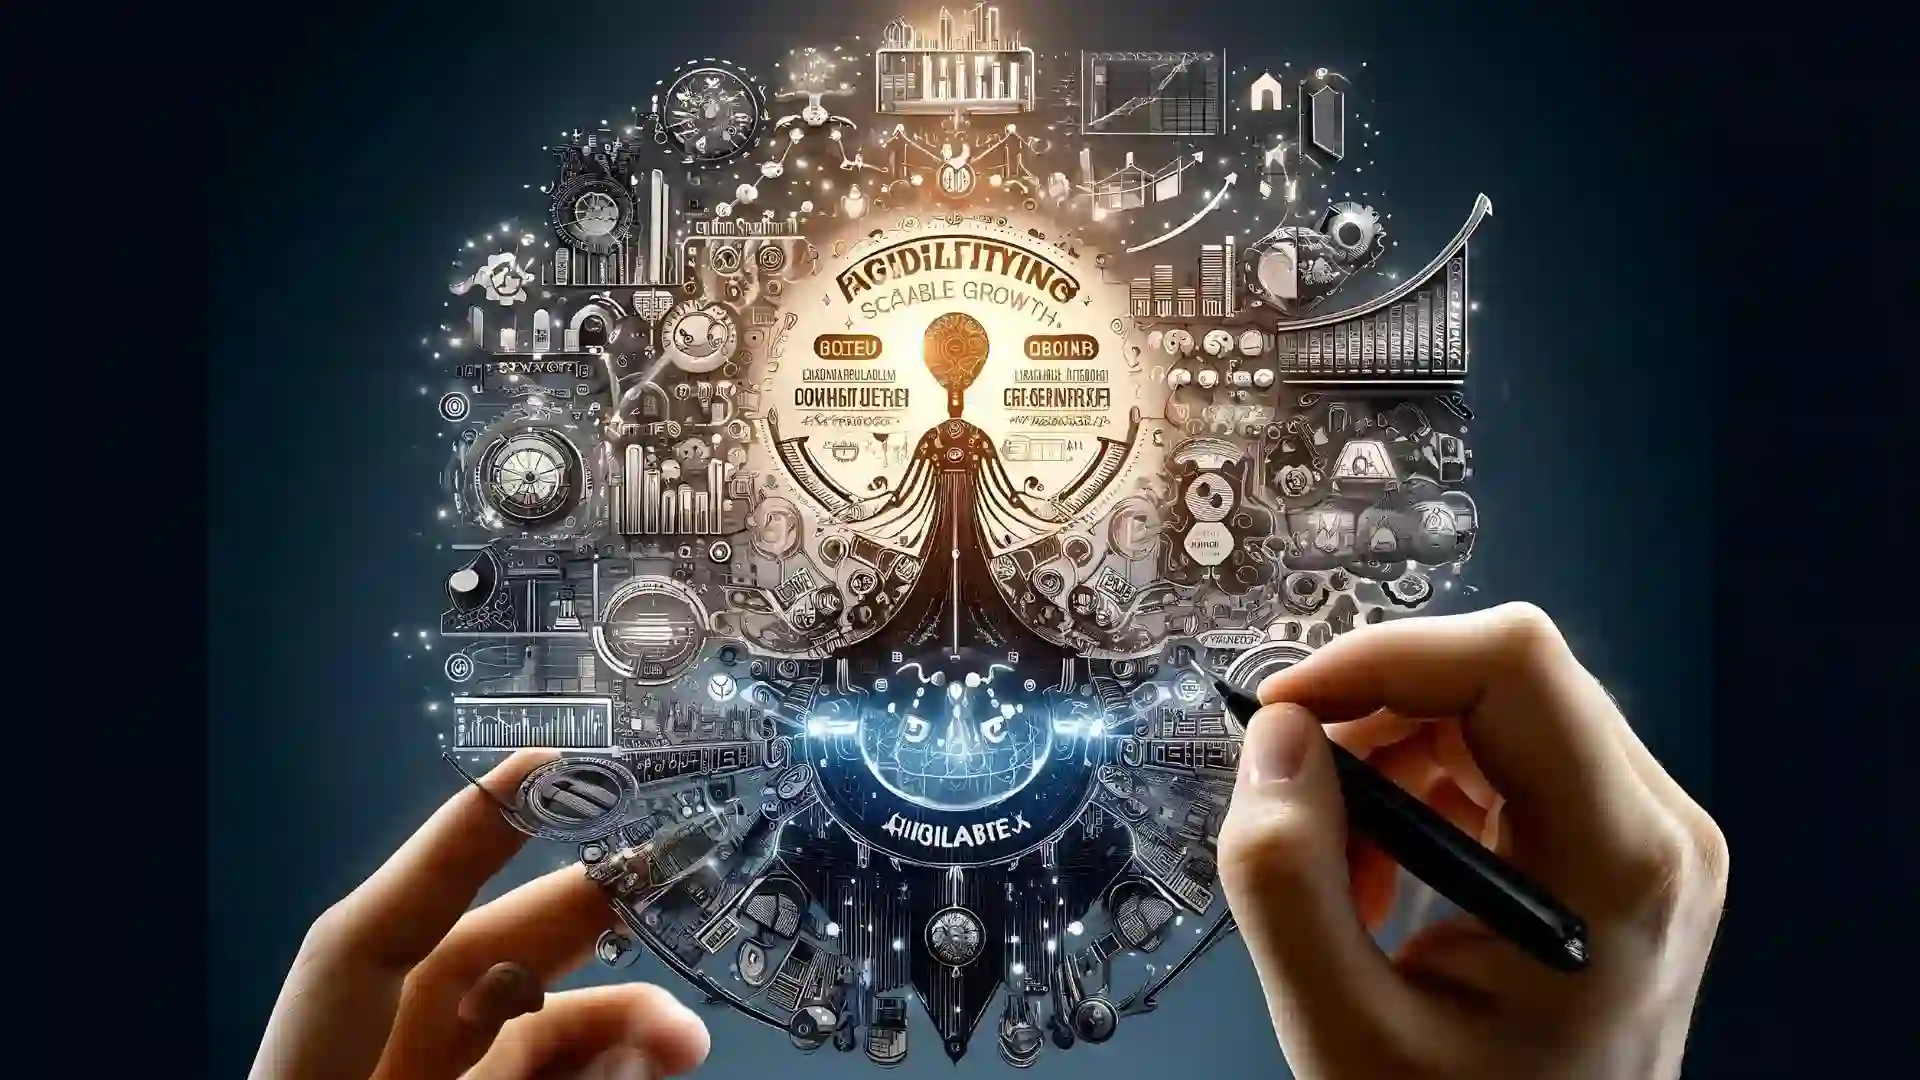 Complex illustration of hands sketching an intricate blueprint with futuristic elements and keywords about scalability and growth in a business context with InkBot.